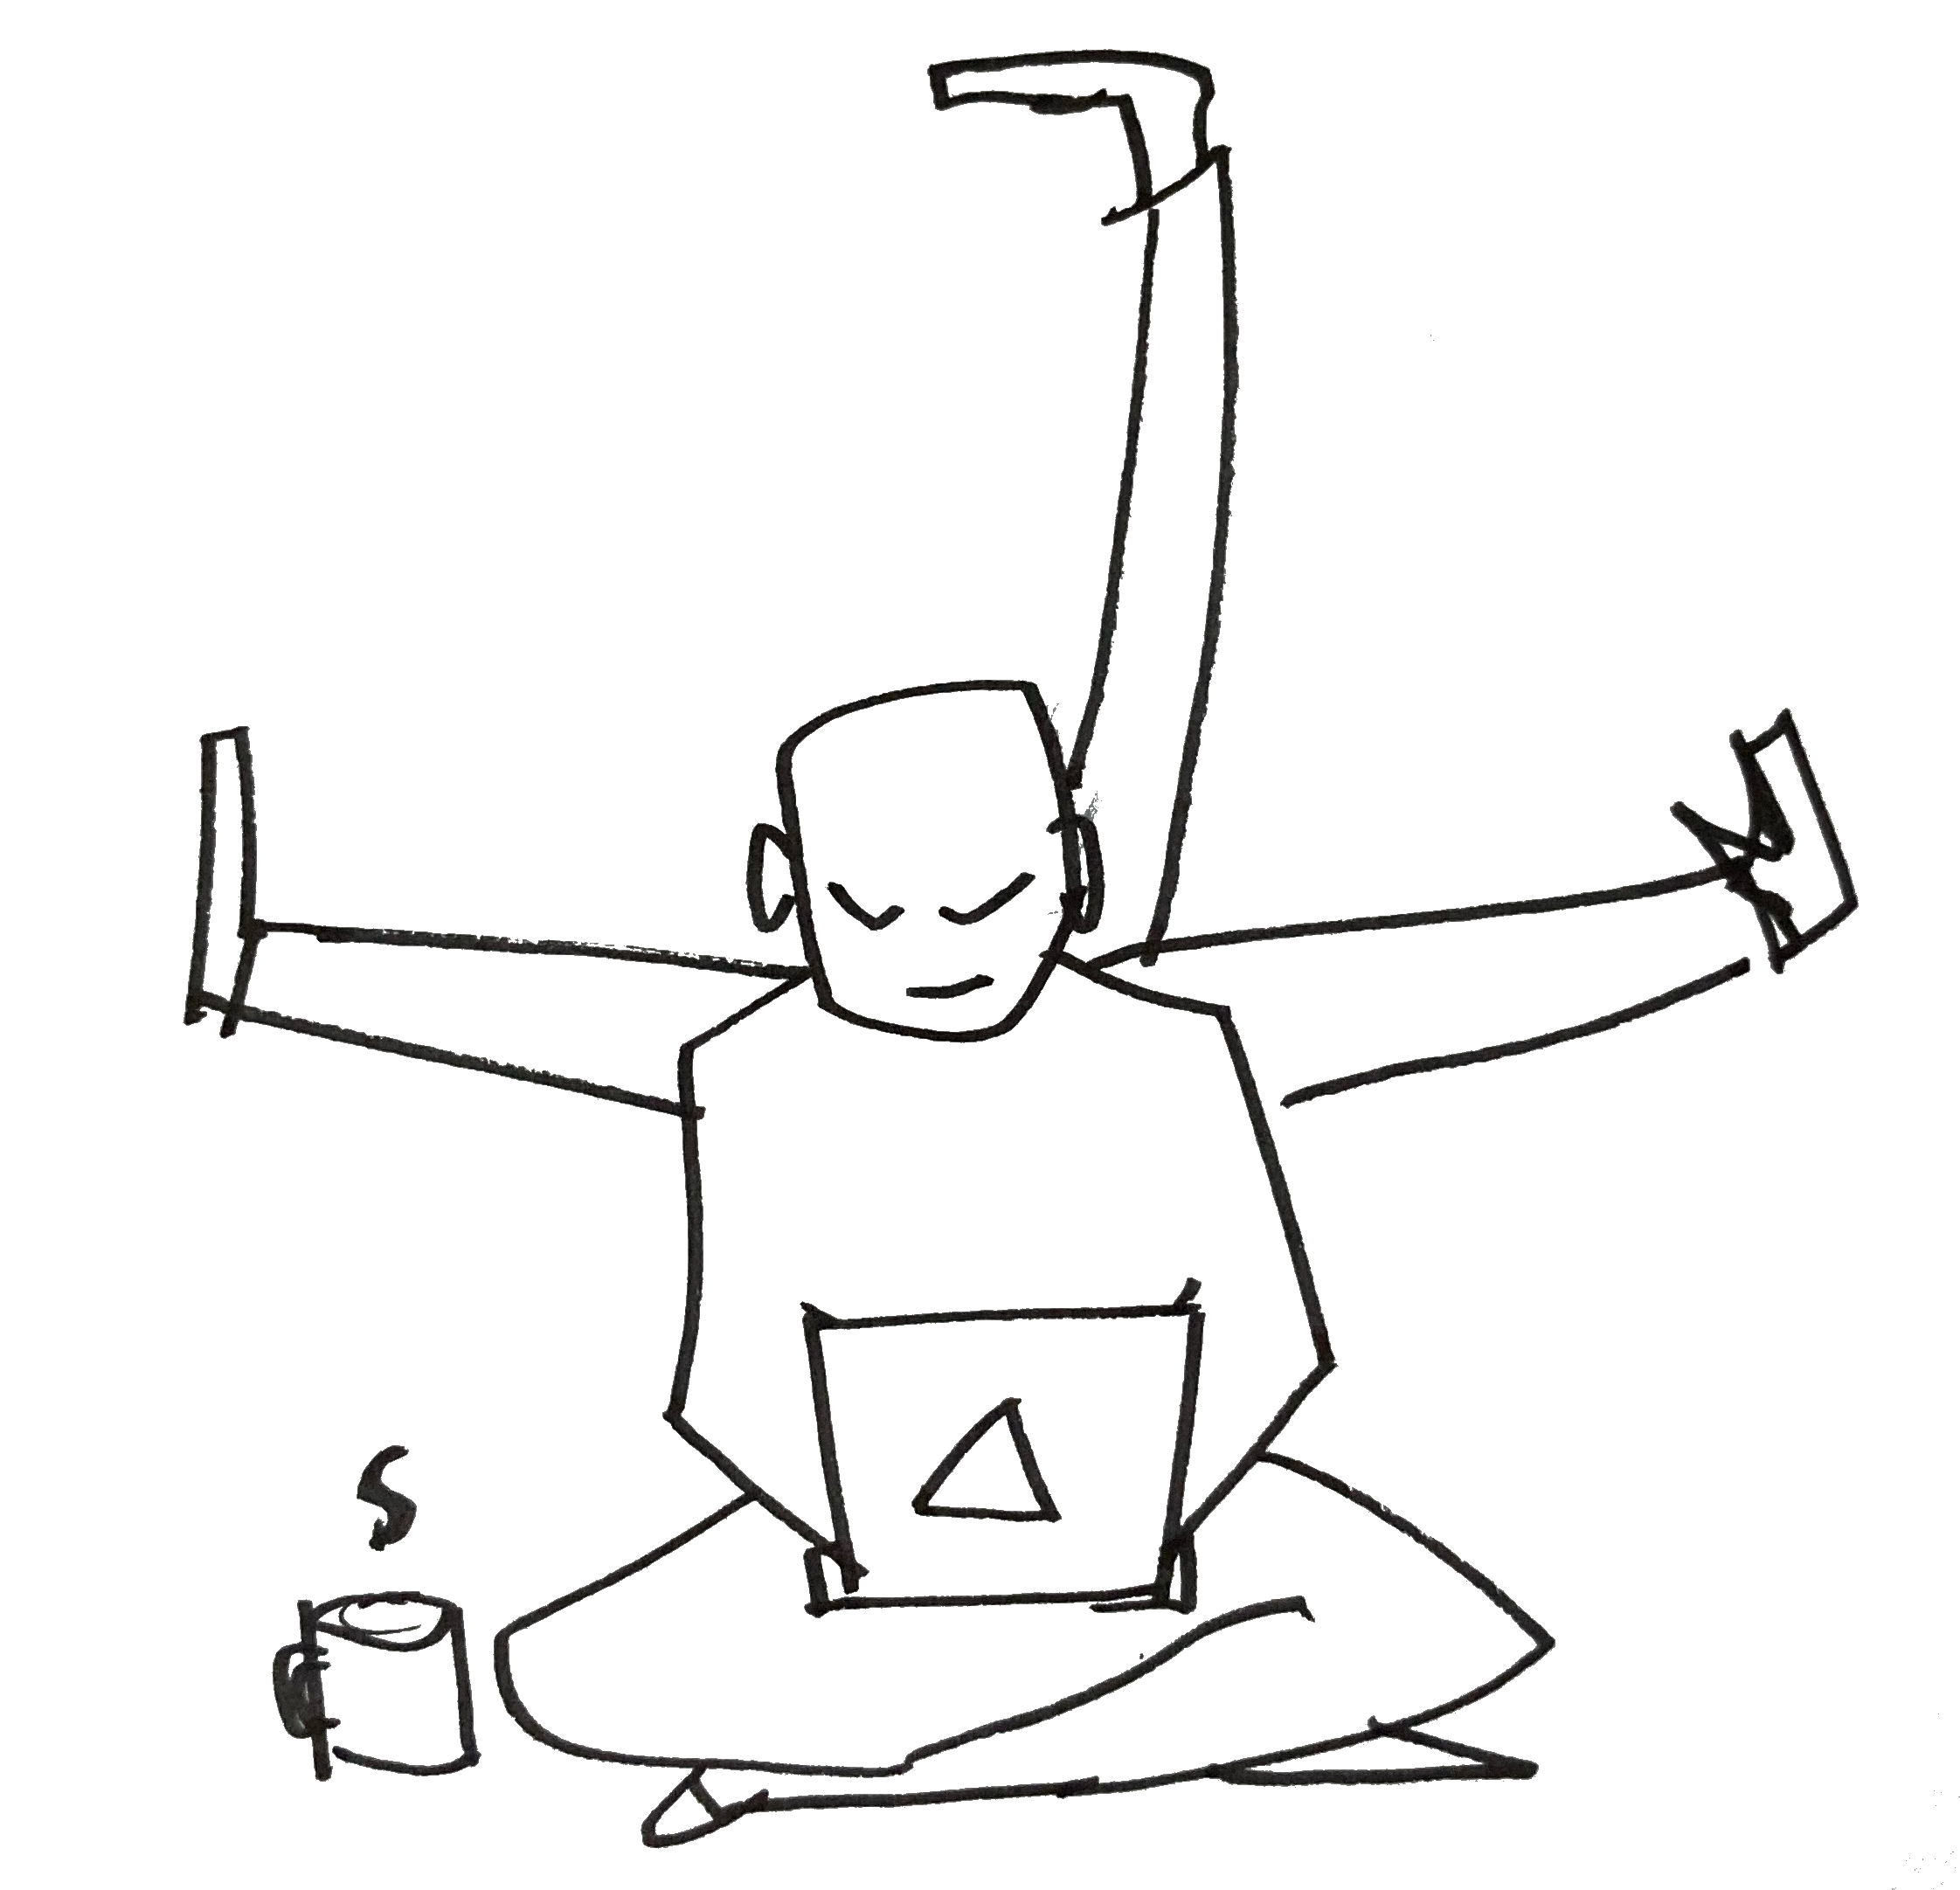 A person uses their computer. Three additional arms sprout from their back, each gesturing 'stop' in a different direction.